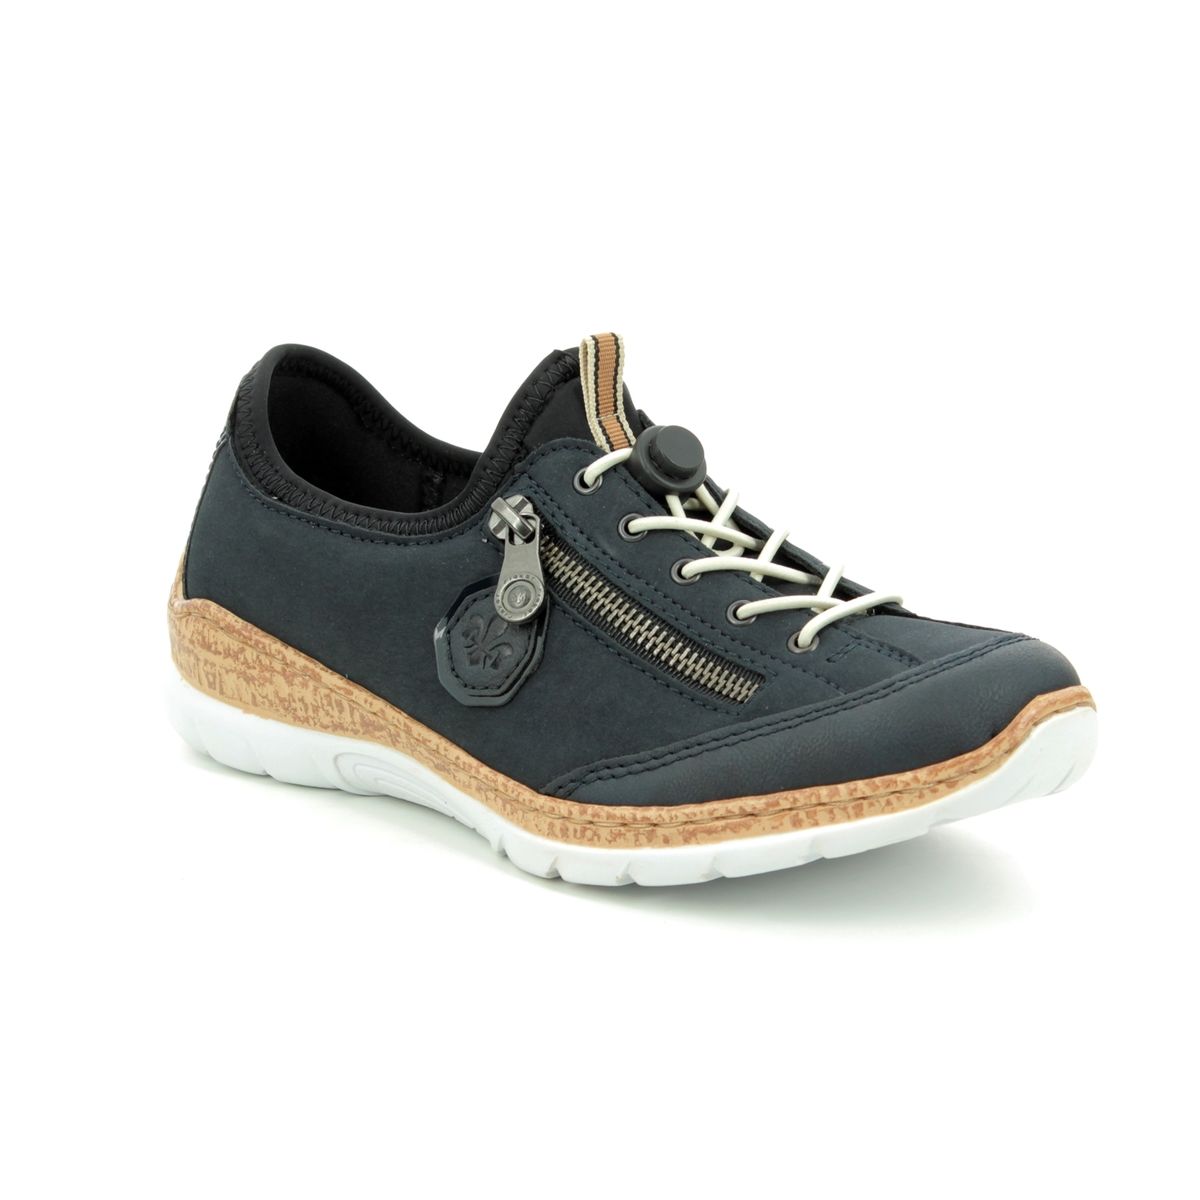 Rieker Empirico Navy Womens Lacing Shoes N4263-14 In Size 41 In Plain Navy